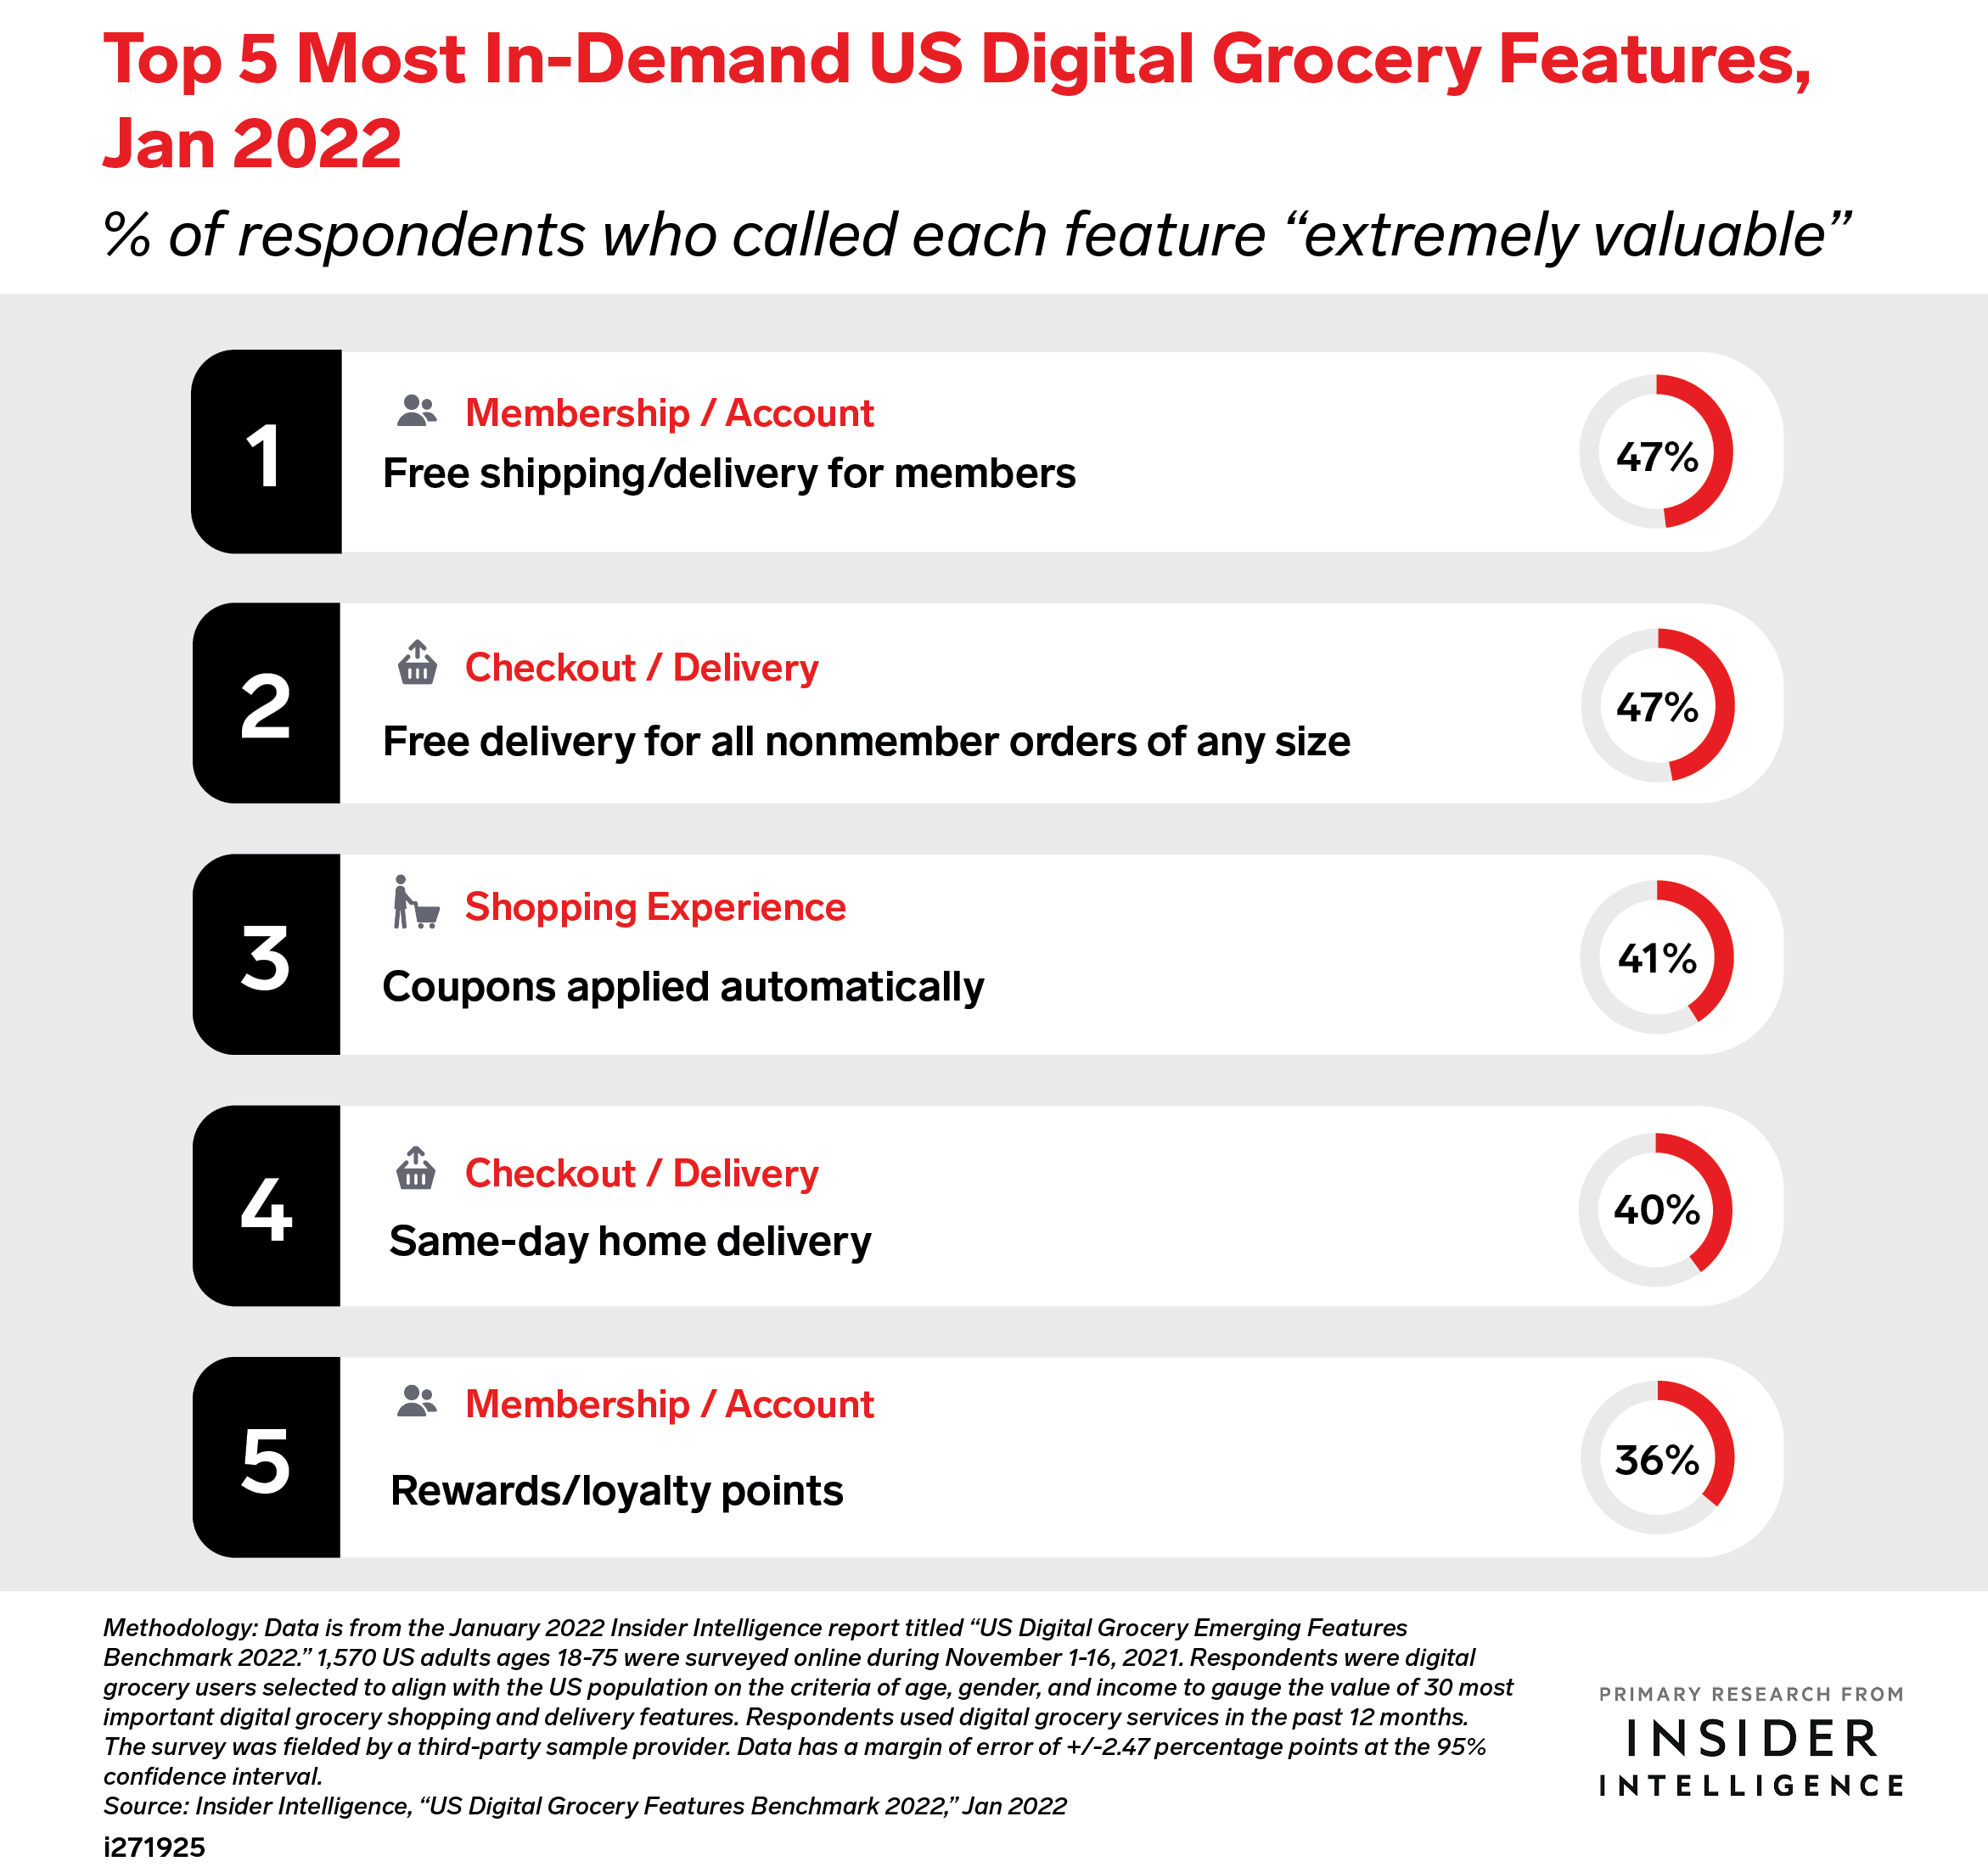 Top 5 Most In-Demand US Digital Grocery Features, Jan 2022 (% of respondents who called each feature 